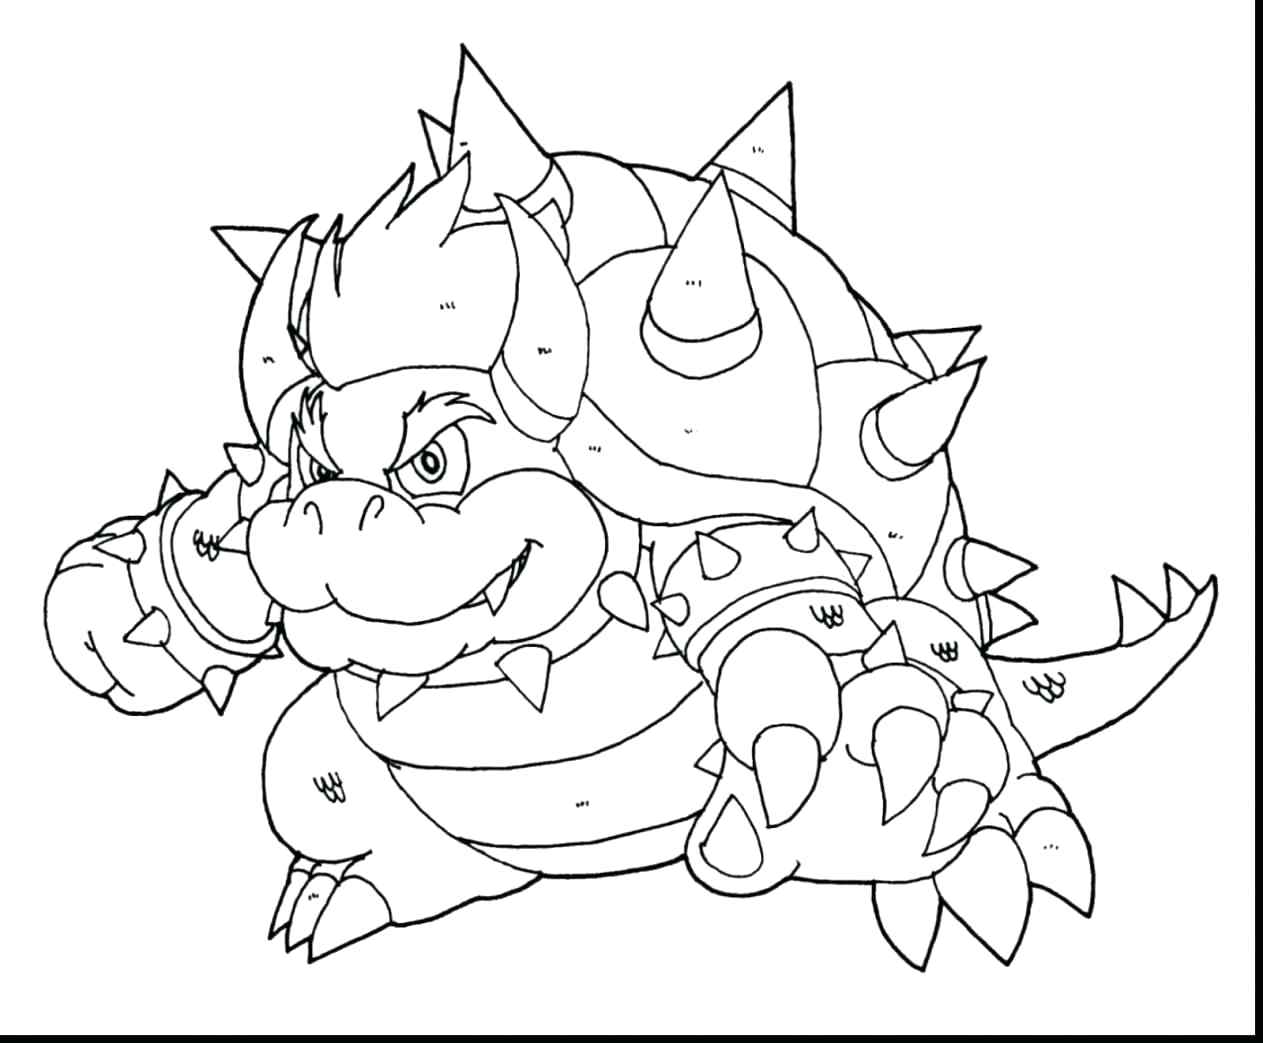 Mario 3d World Coloring Pages at GetDrawings | Free download